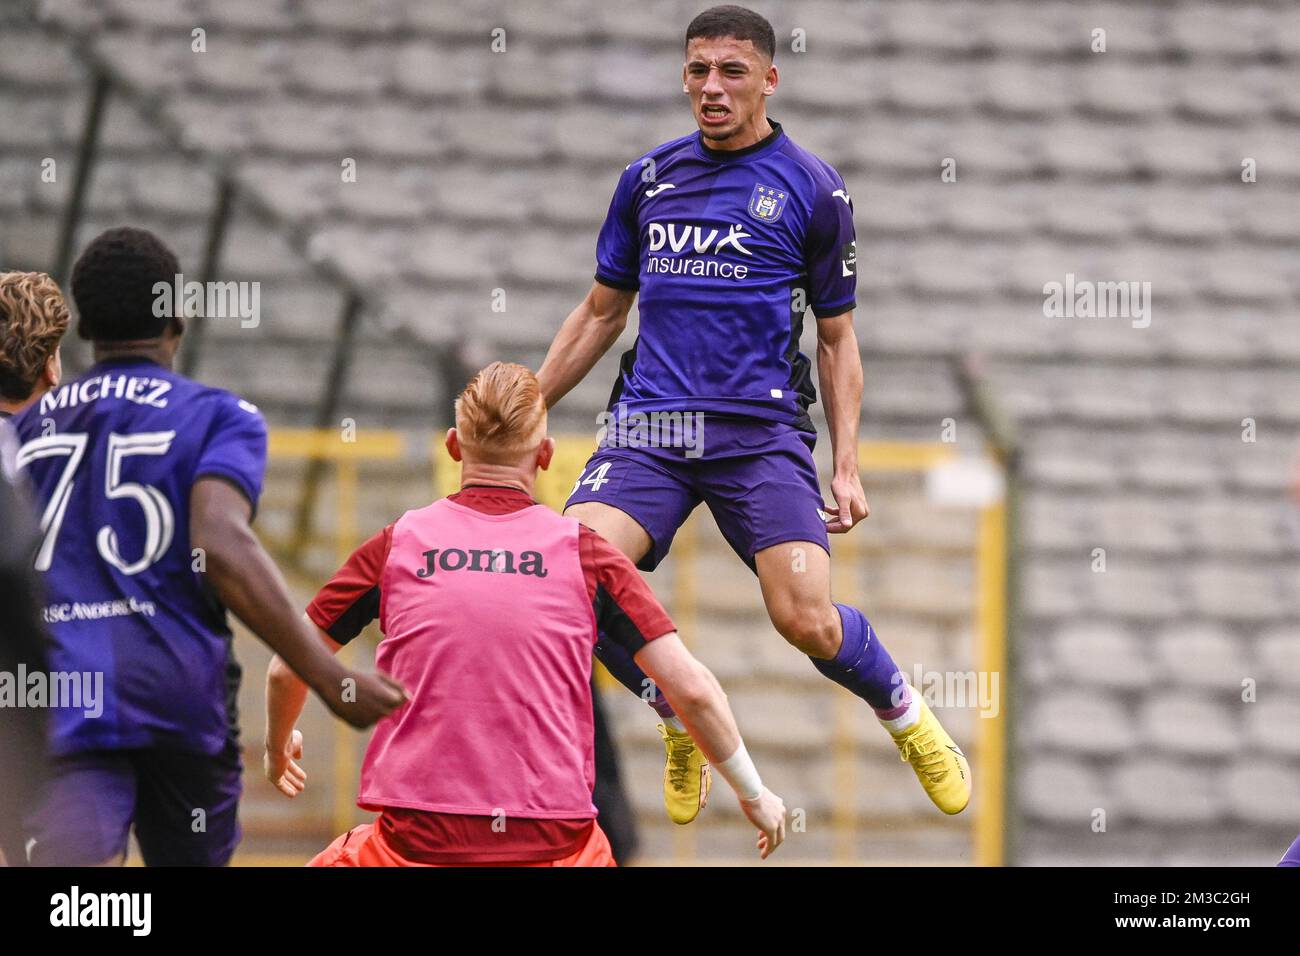 RSCA Futures Mohamed Bouchouari celebrates after scoring during a soccer  match between RSC